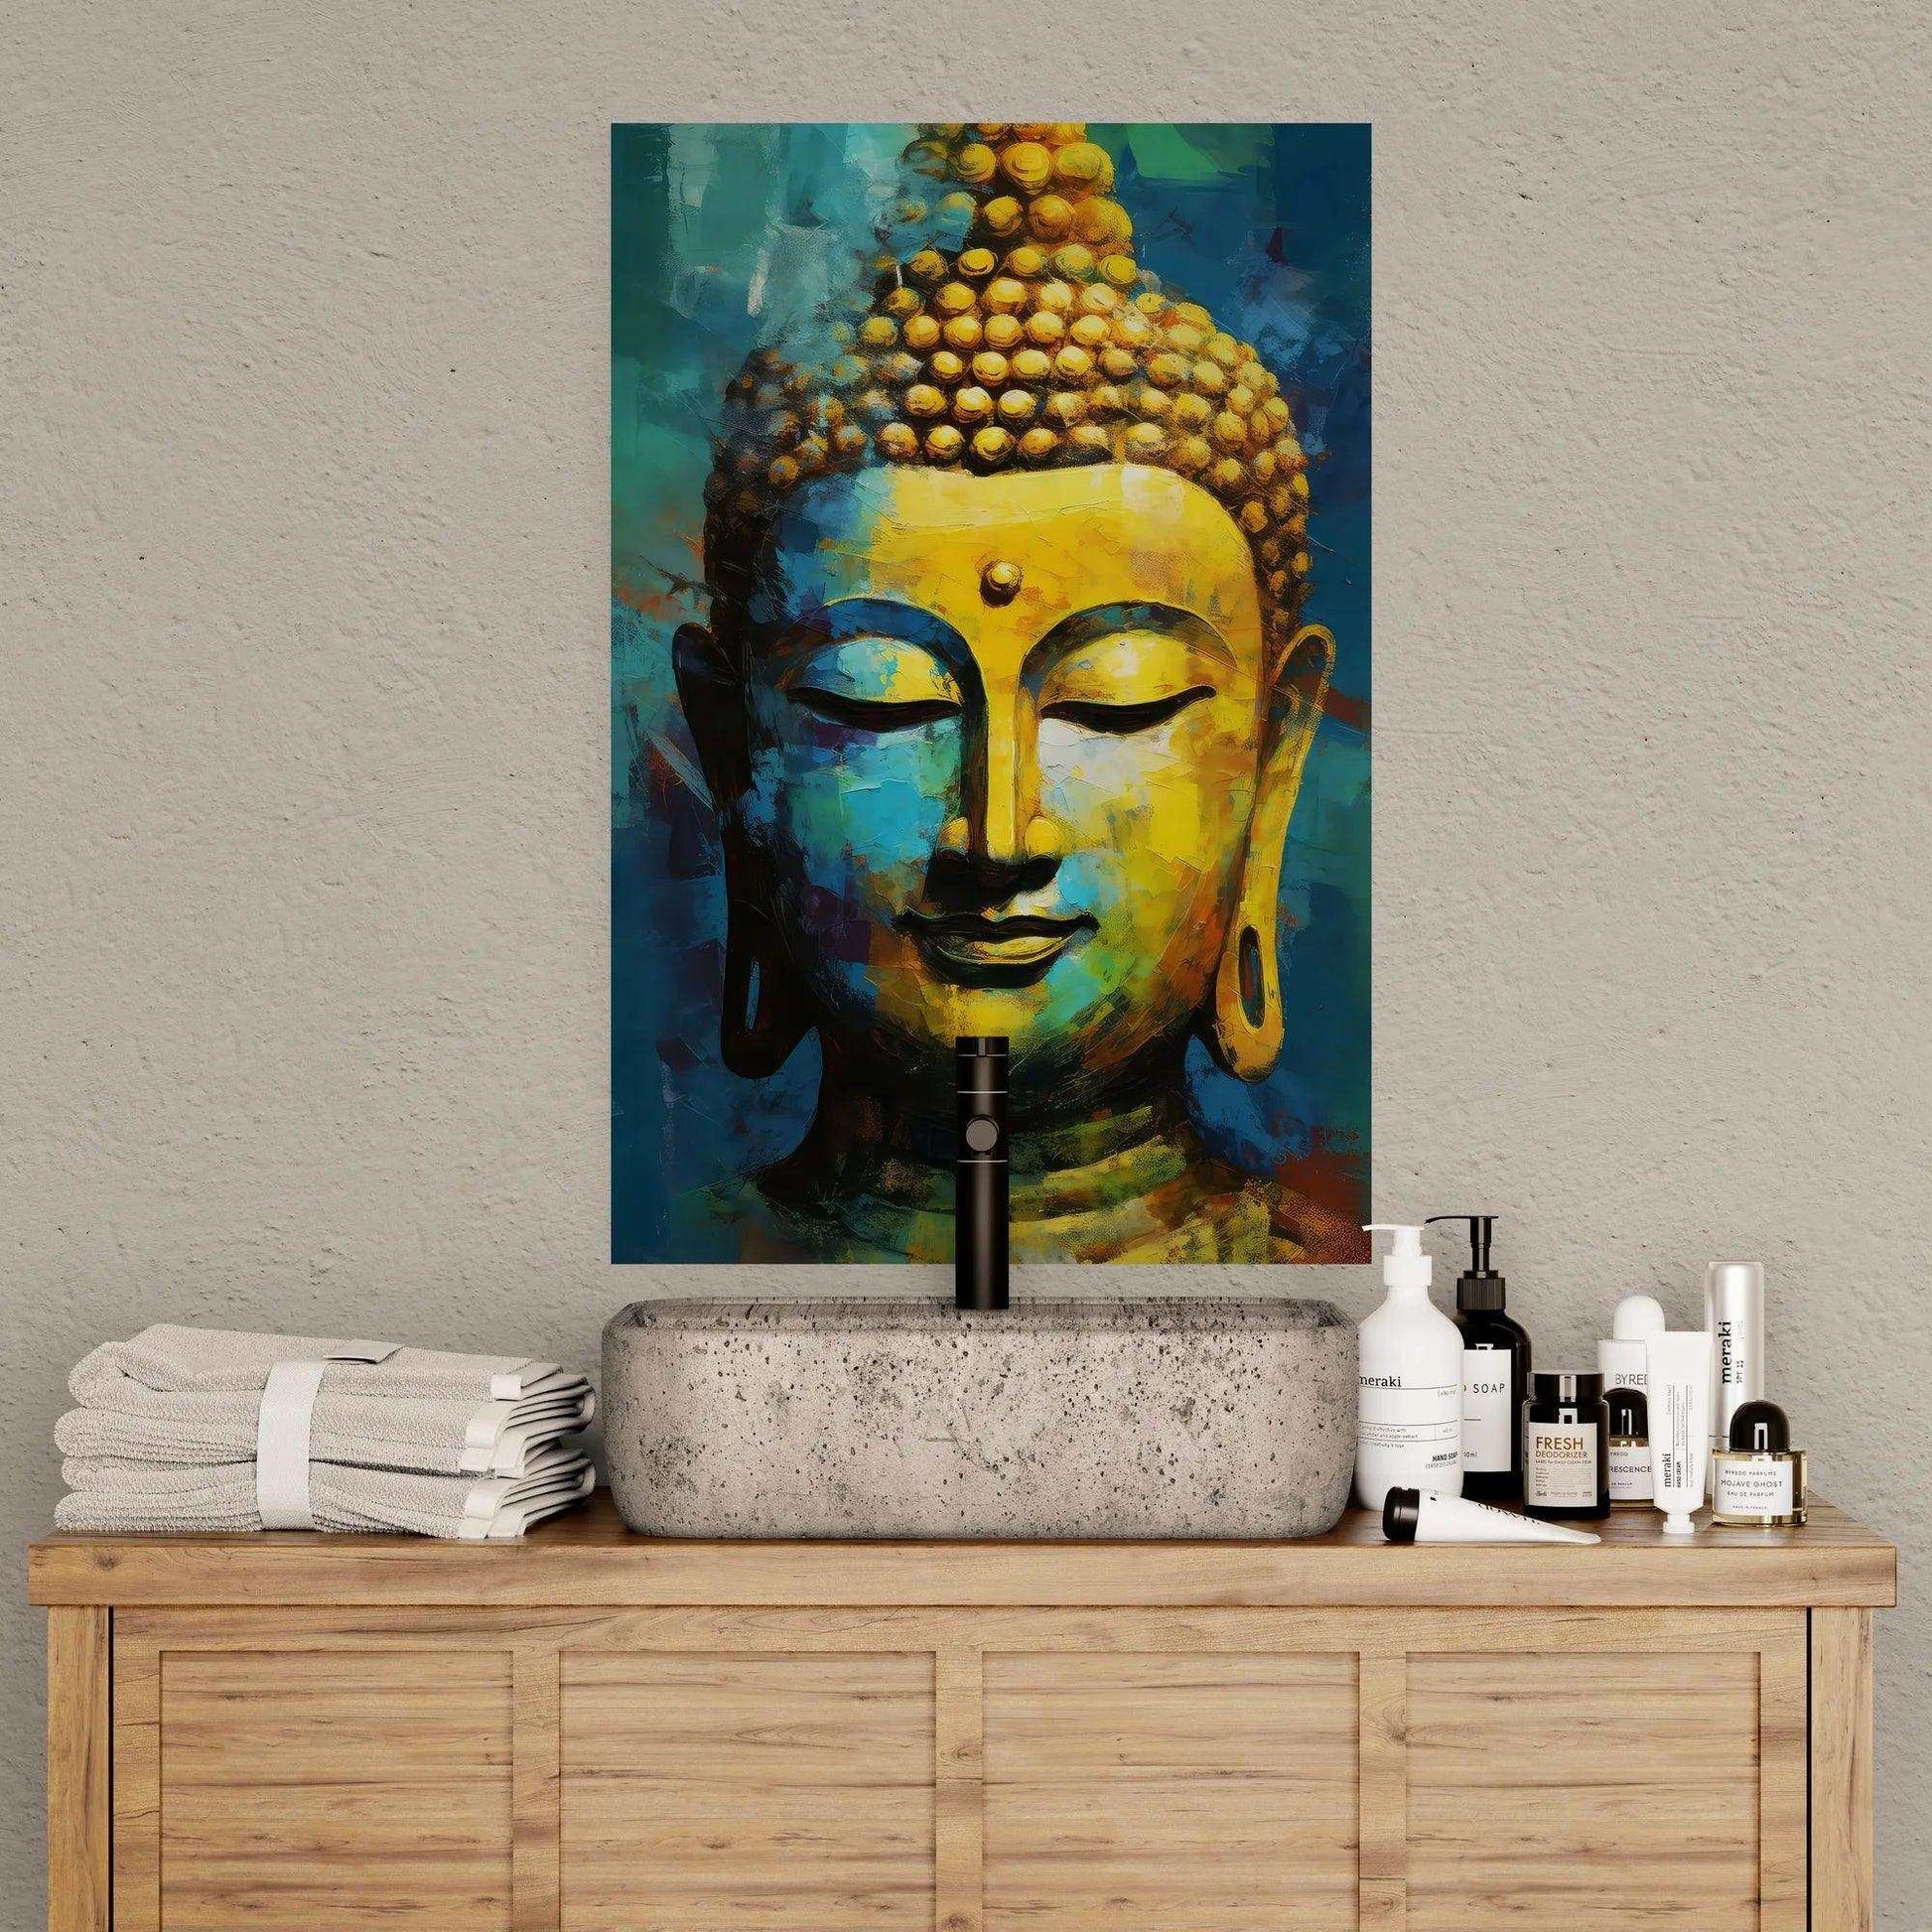 A tranquil bathroom setting featuring a stone countertop with skincare products and a modern bowl sink, complemented by a vibrant Buddha portrait with warm golden and blue hues, bringing a serene and contemplative ambiance to the space.